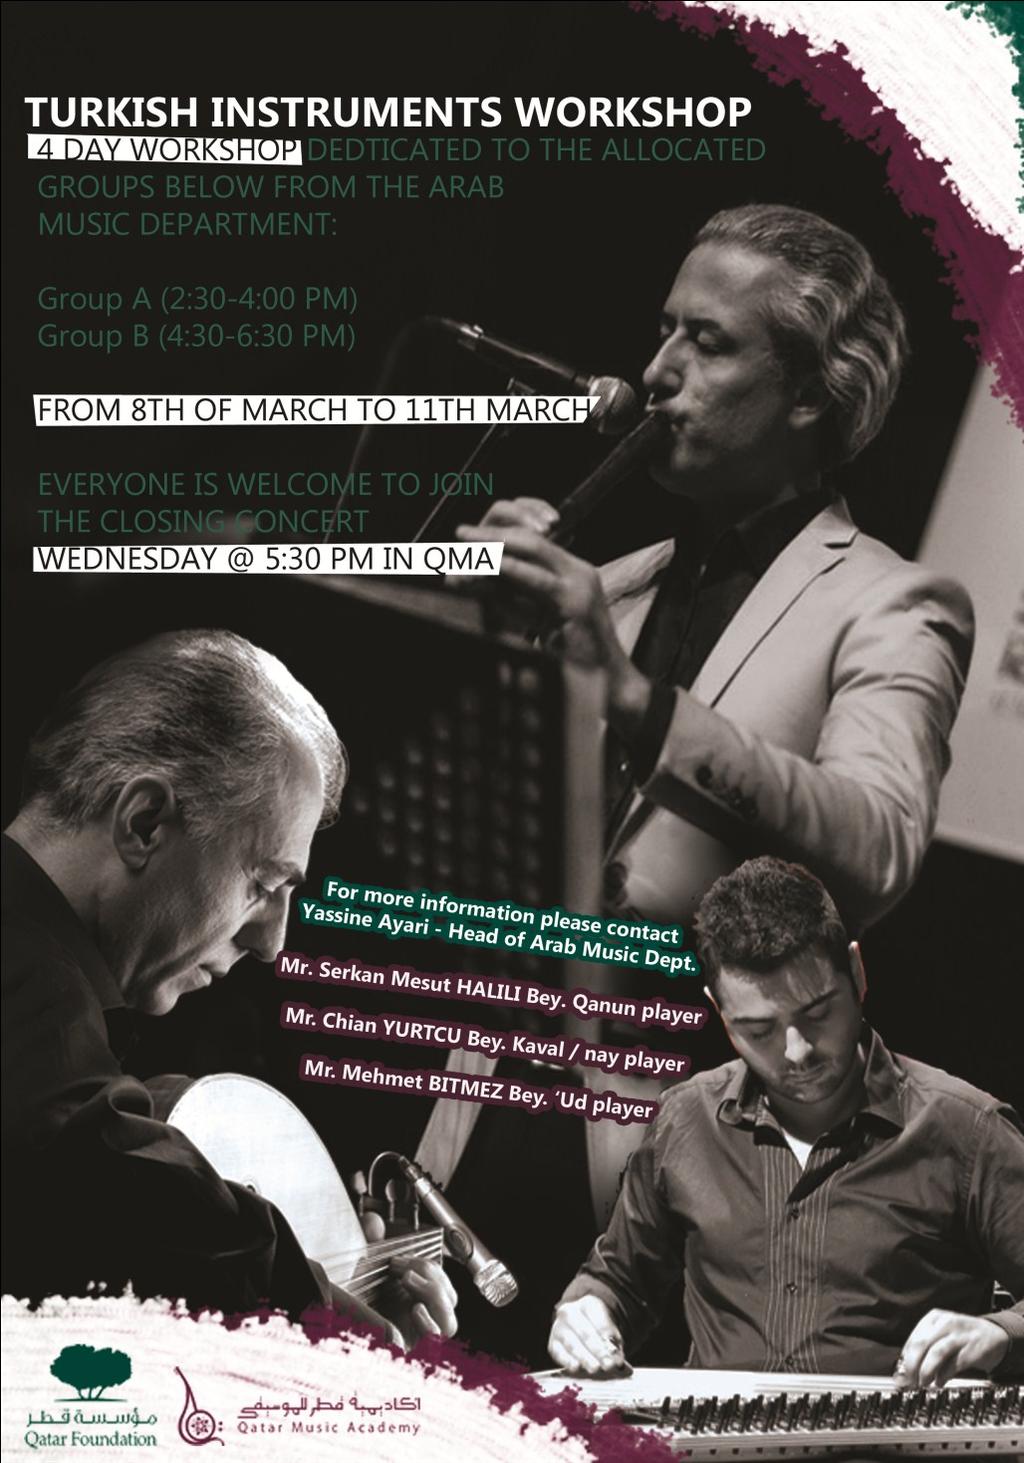 Coming soon to the AMD Turkish Musicians to Collaborate with QMA The Arab Music Department is inviting three Turkish musicians from Istanbul Technical University, Traditional Music Conservatory for a